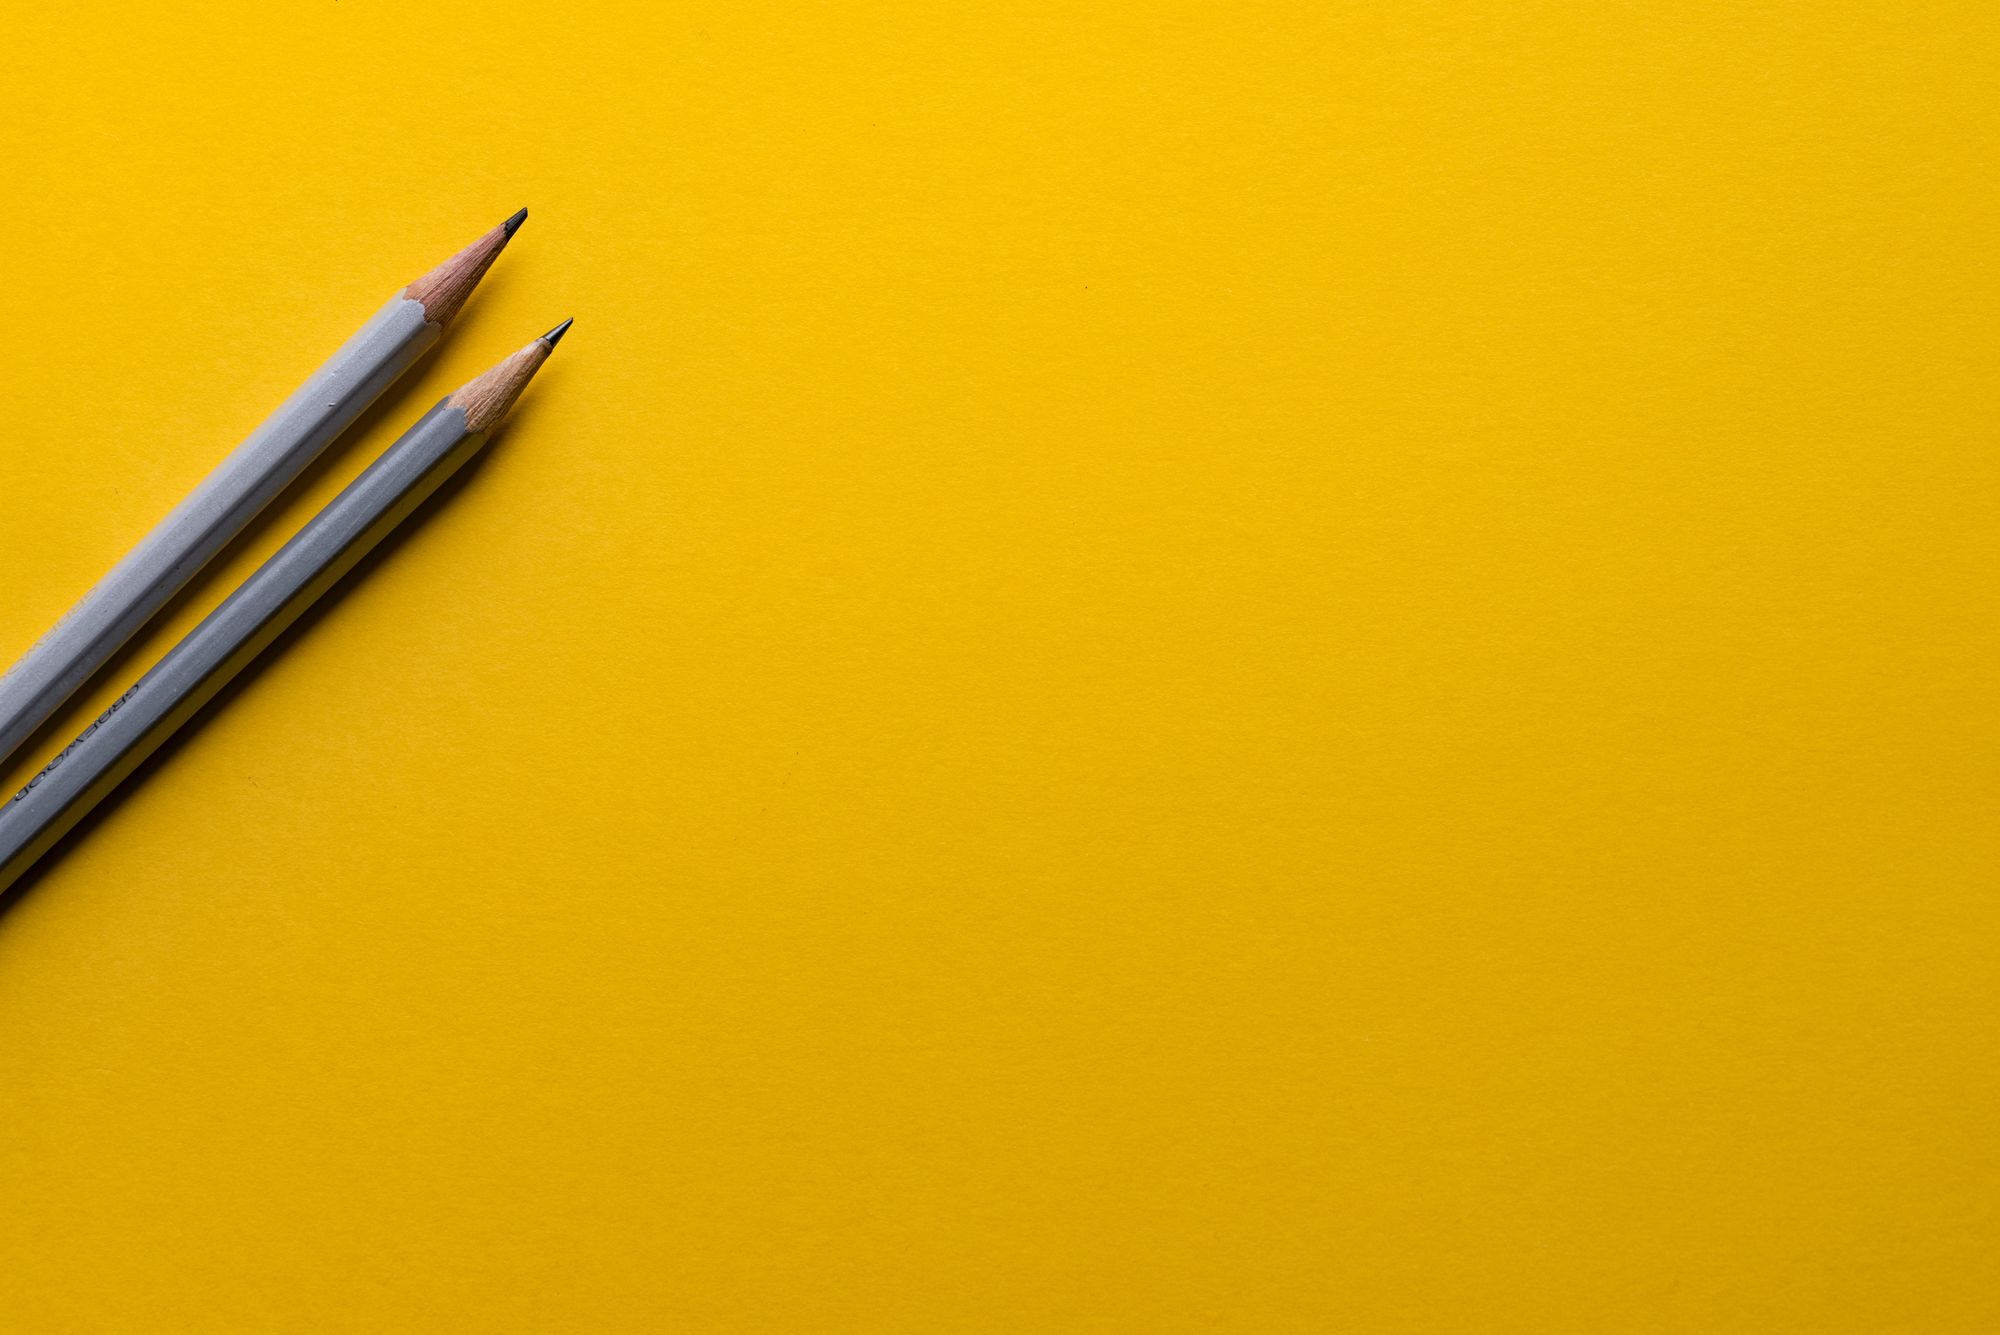 Stock photo of pens on yellow background. 